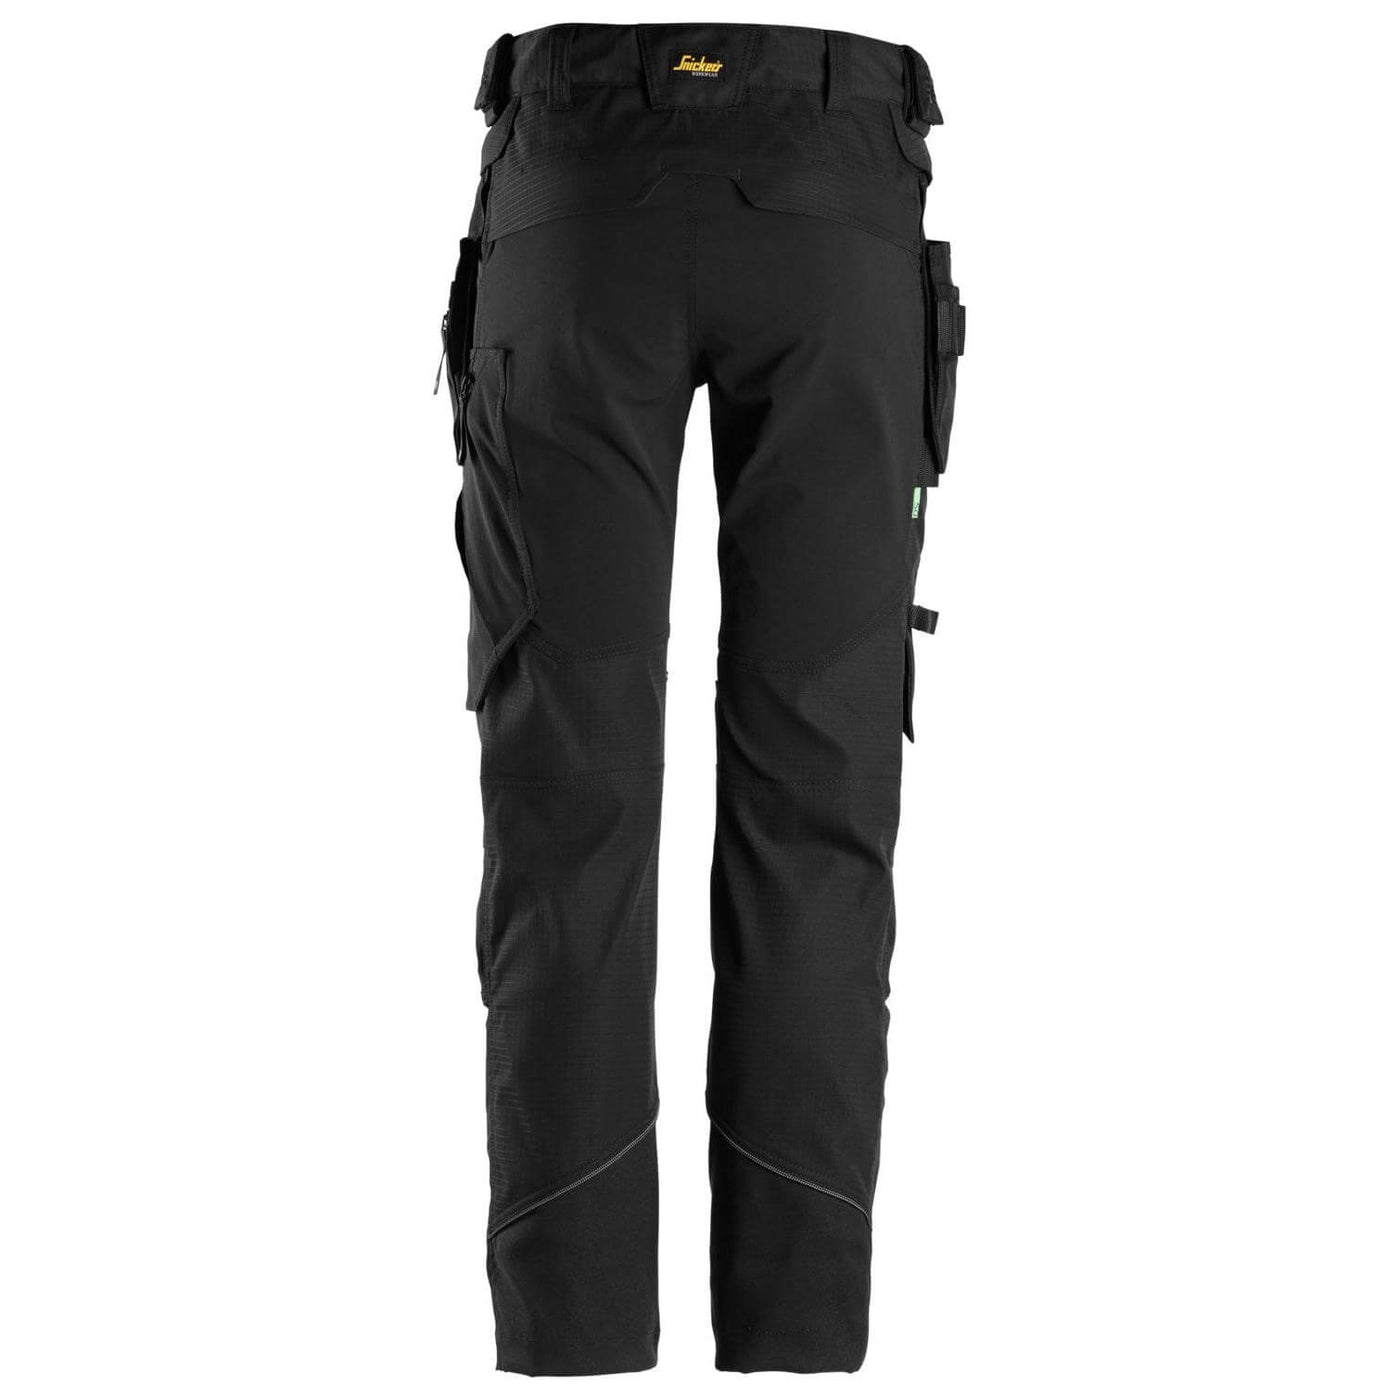 Snickers 6972 Slim Fit Ripstop Work Trousers with Detachable Holster Pockets Black Black back #colour_black-black